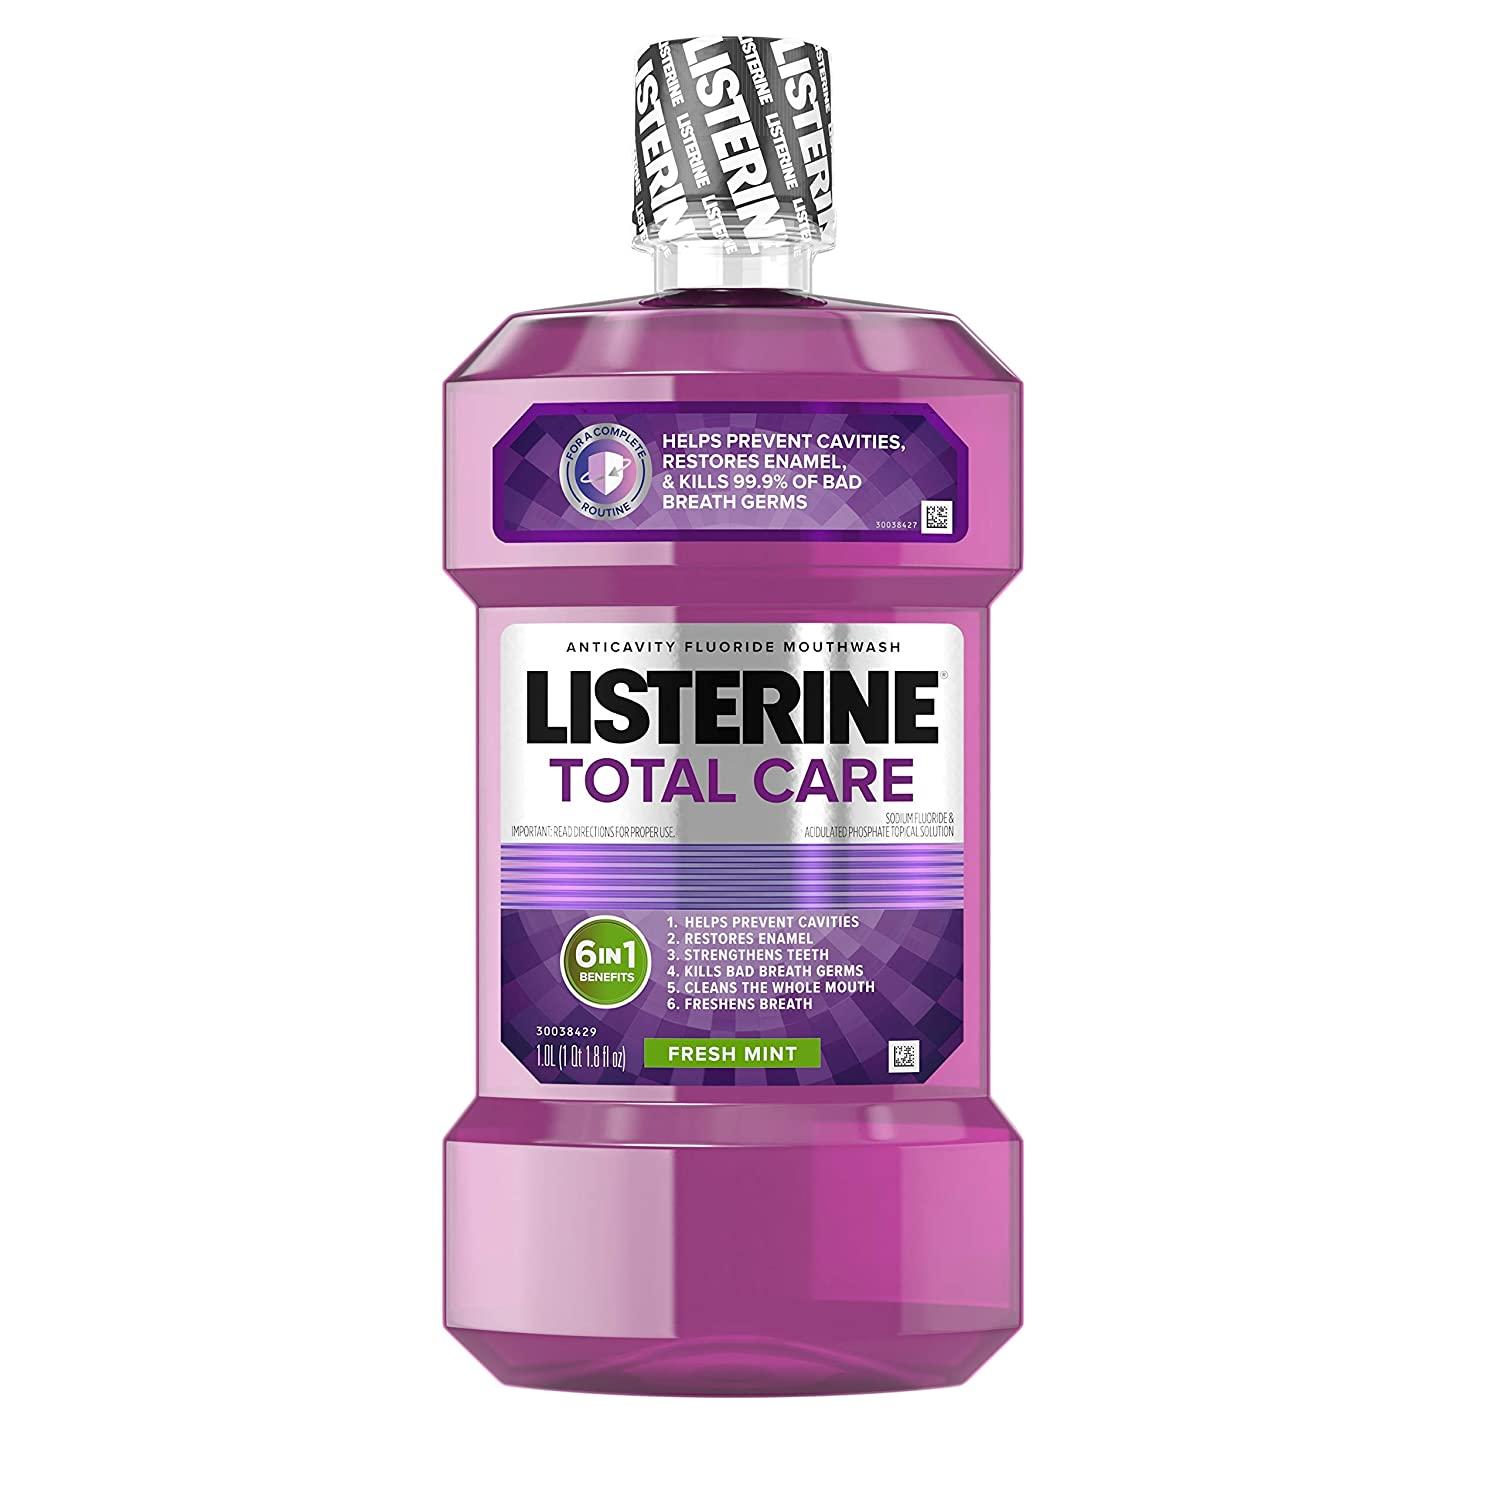 Listerine Total Care Anticavity Fresh Mint Fluoride Mouthwash for $4.61 Shipped